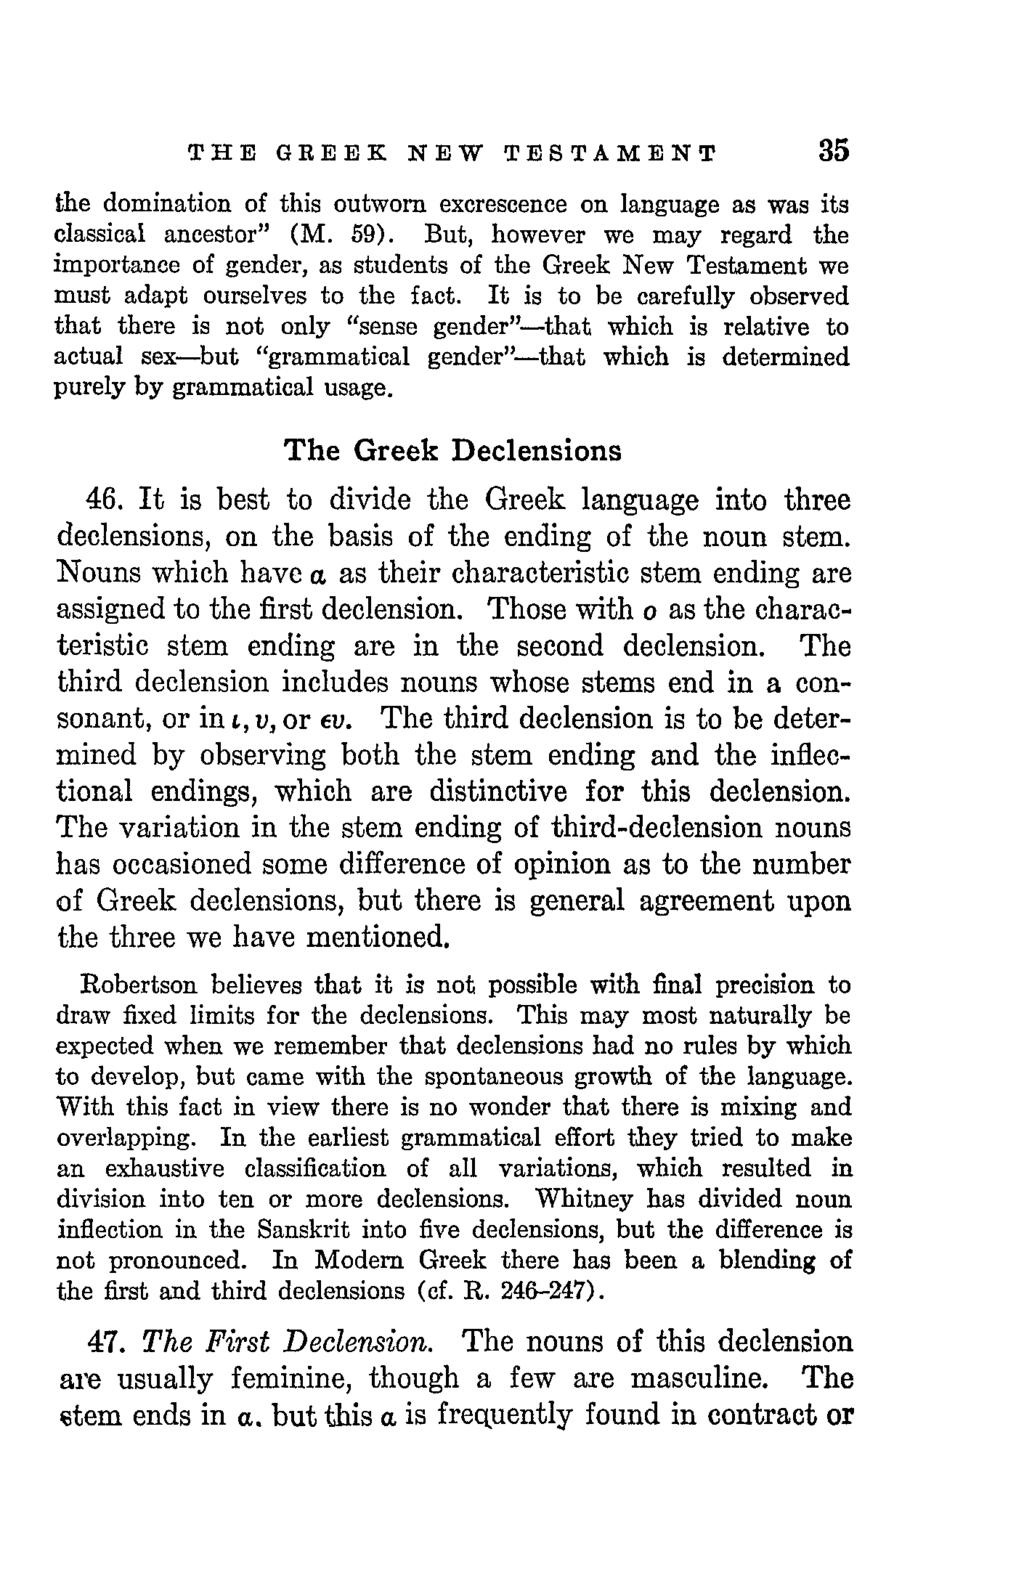 THE GREEK NEW TESTAMENT 35 the domination of this outworn excrescence on language as was its classical ancestor" (M. 59).